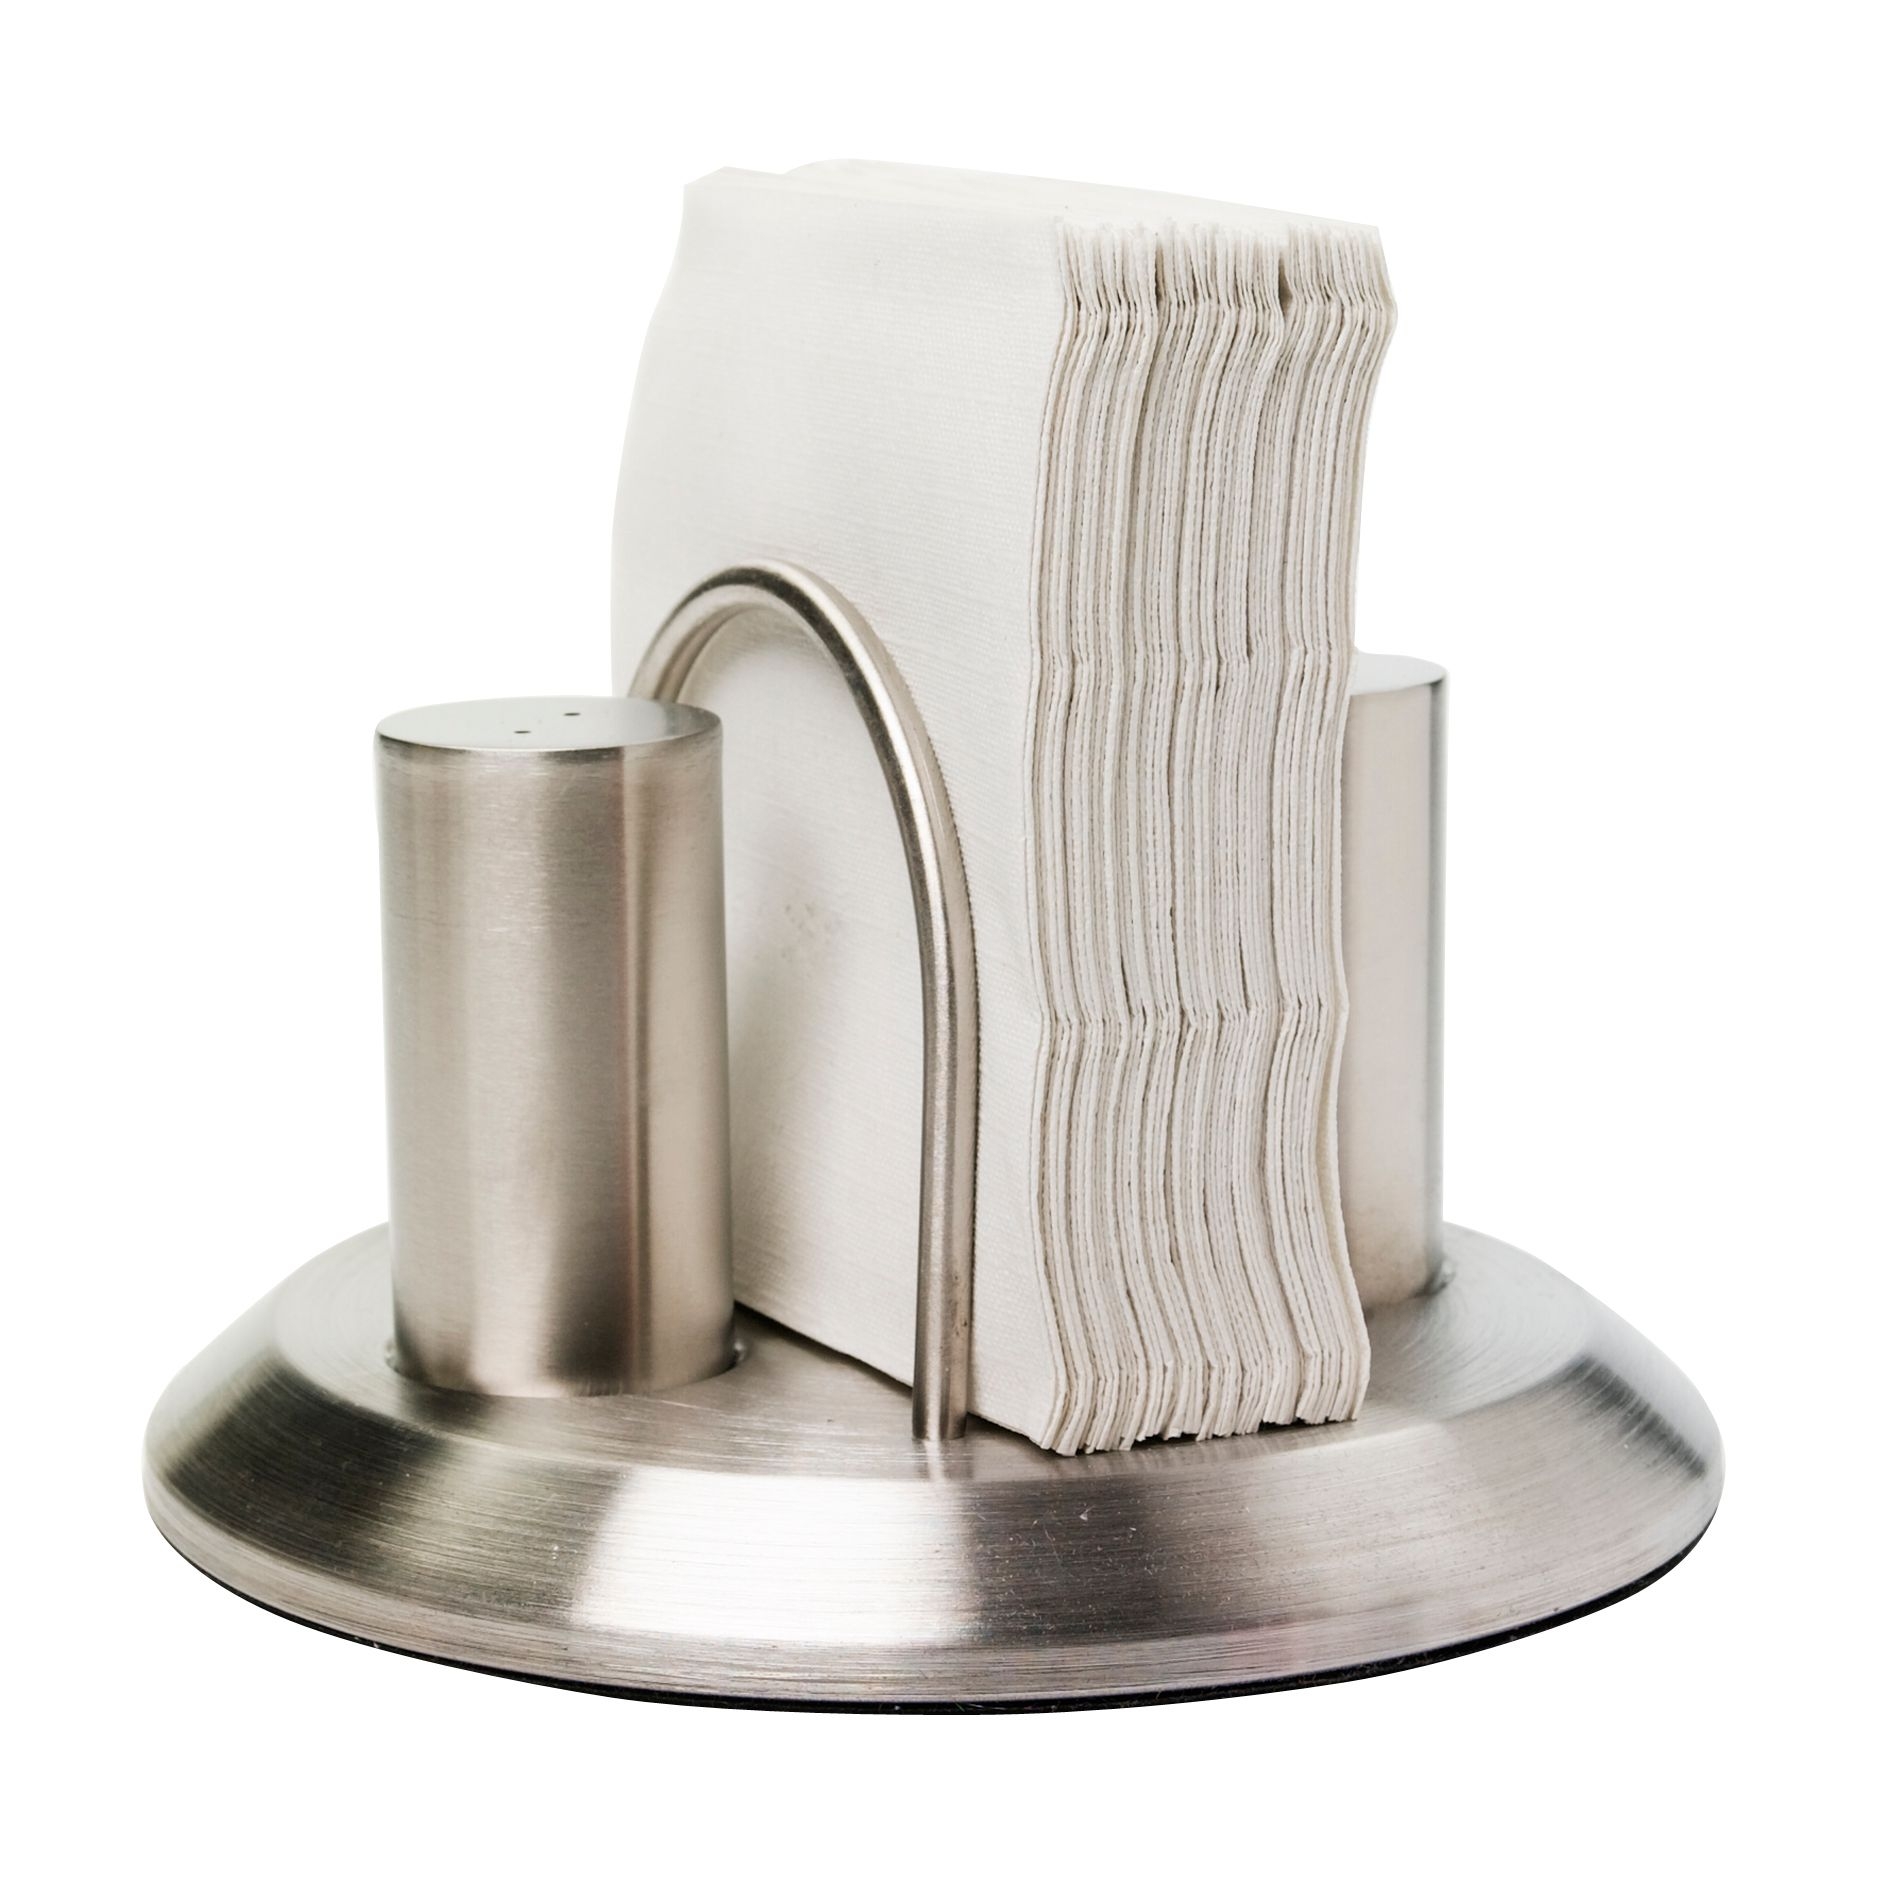 Napkin Holders for Kitchen Modern Stainless Steel Dinner Flat Paper Napkin Tray Silver 5.3x5.3 Inch Napkin Holder for Tables ver 5.3 x 5.3 Inch 